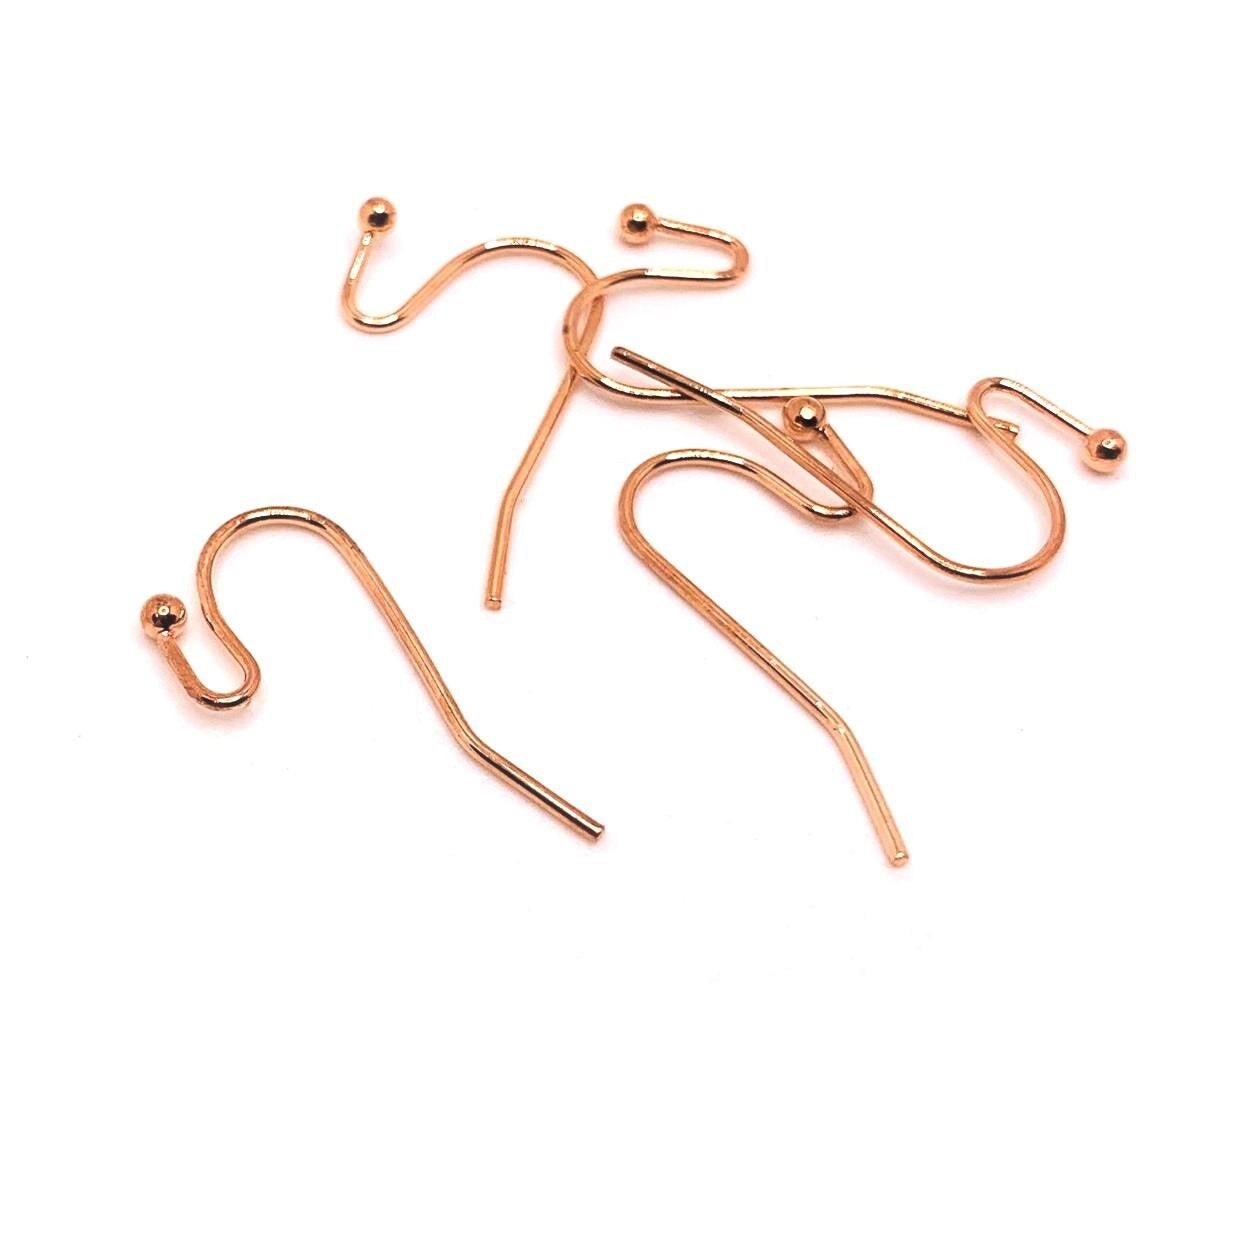 100 or 500 Pieces: Rose Gold Shepherd Fish Hook Earring Wires